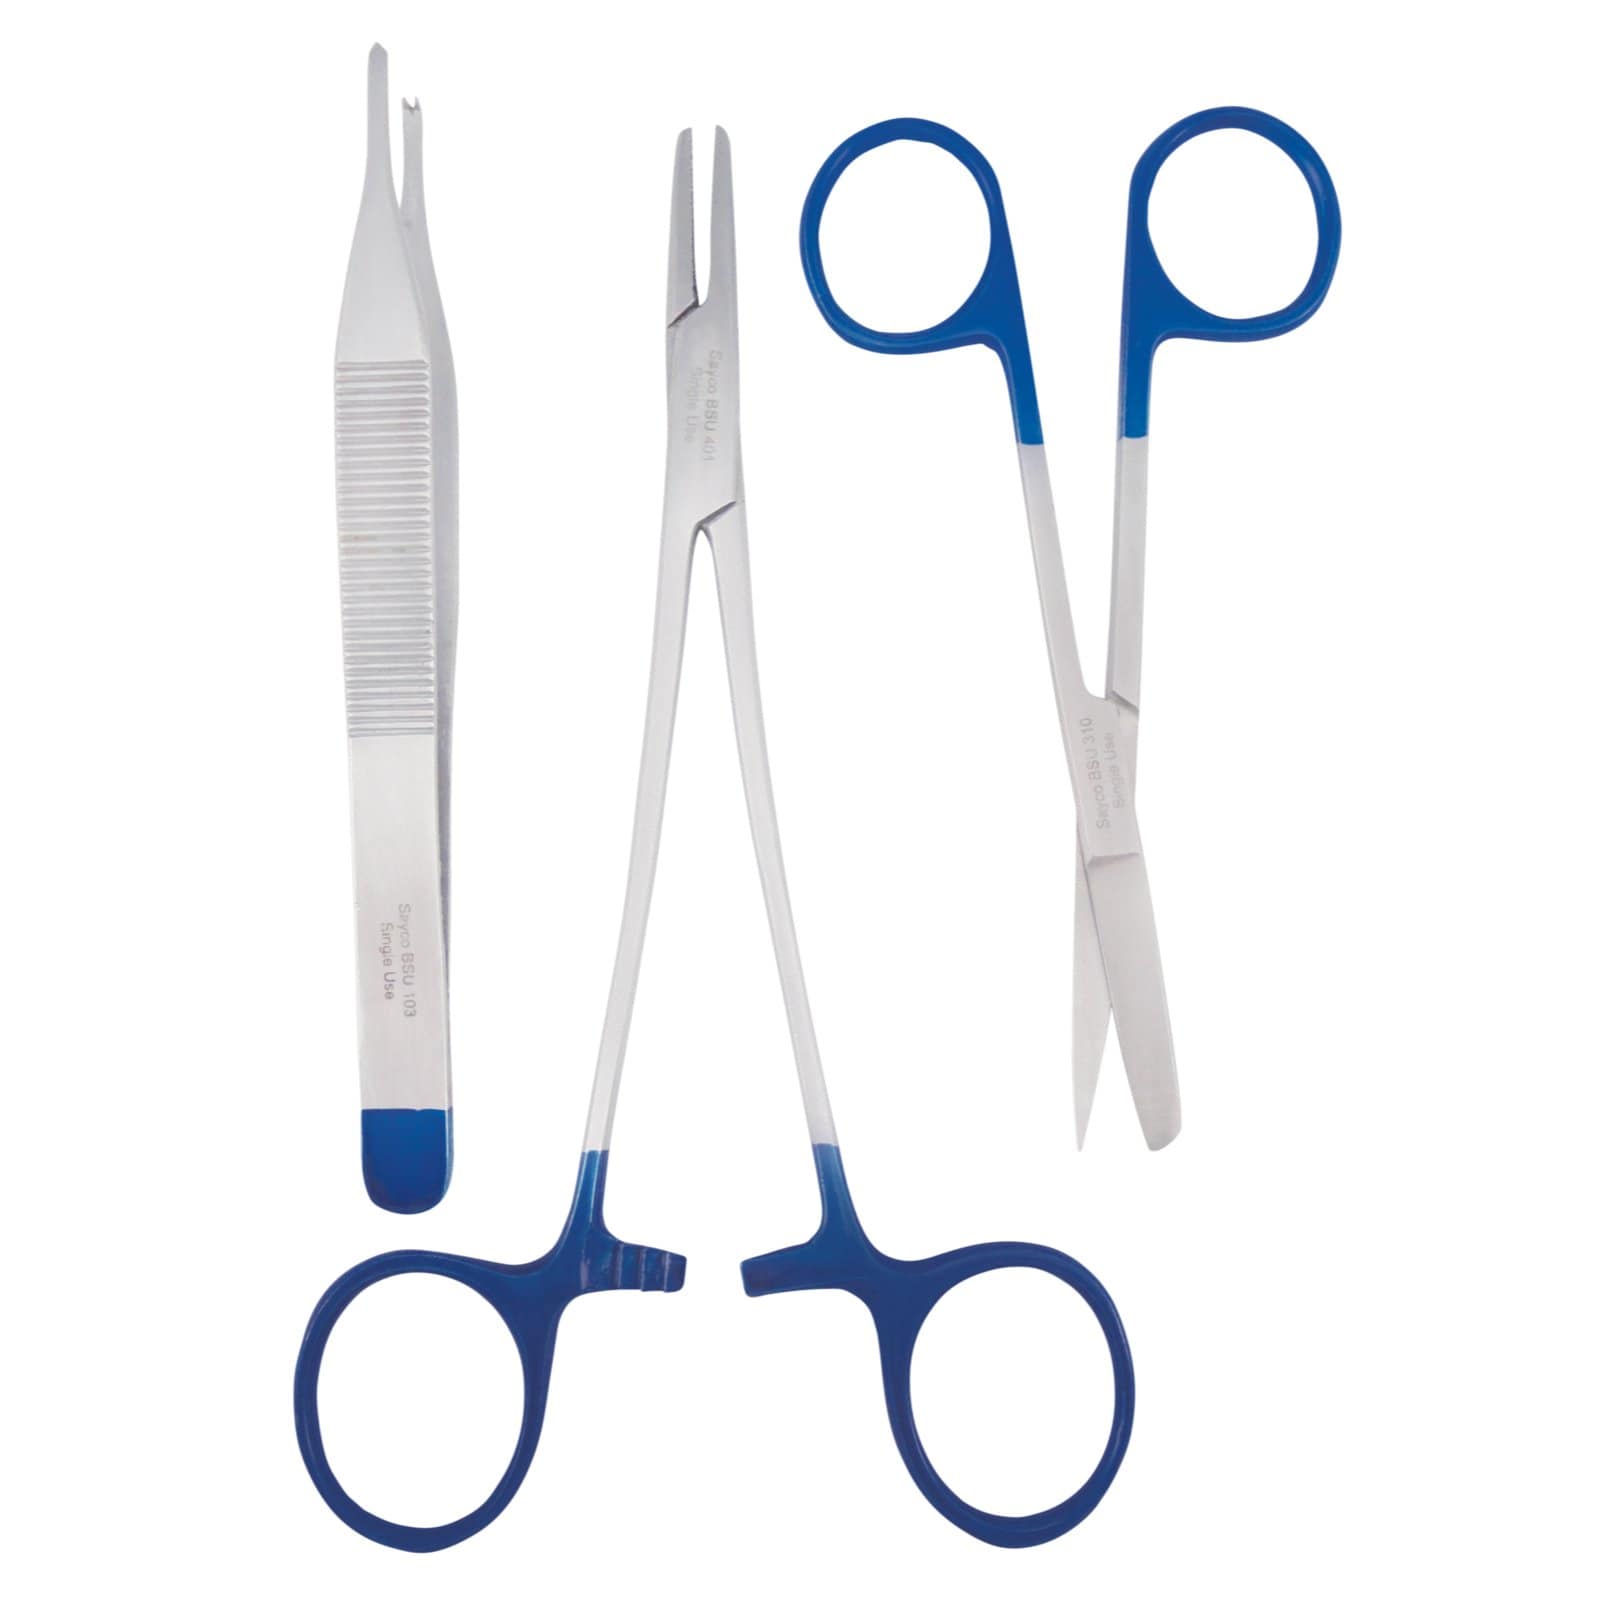 SAYCO Sterile Surgical Instruments Sharp/Blunt SAYCO Sterile Suture Pack with Scissors